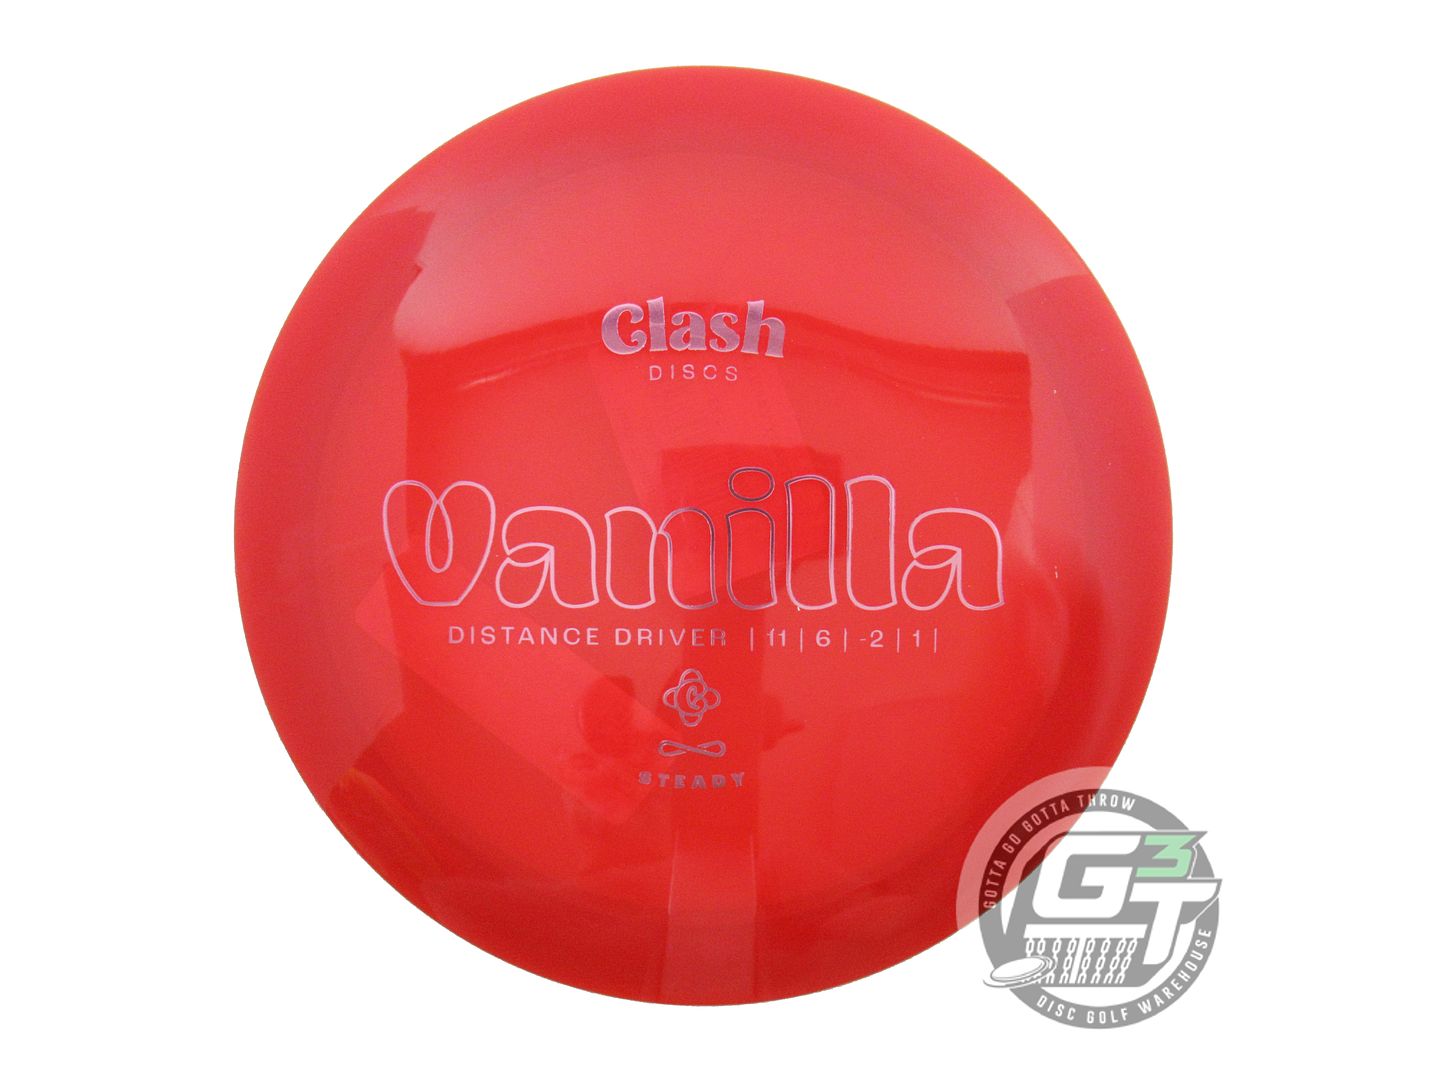 Clash Steady Vanilla Distance Driver Golf Disc (Individually Listed)